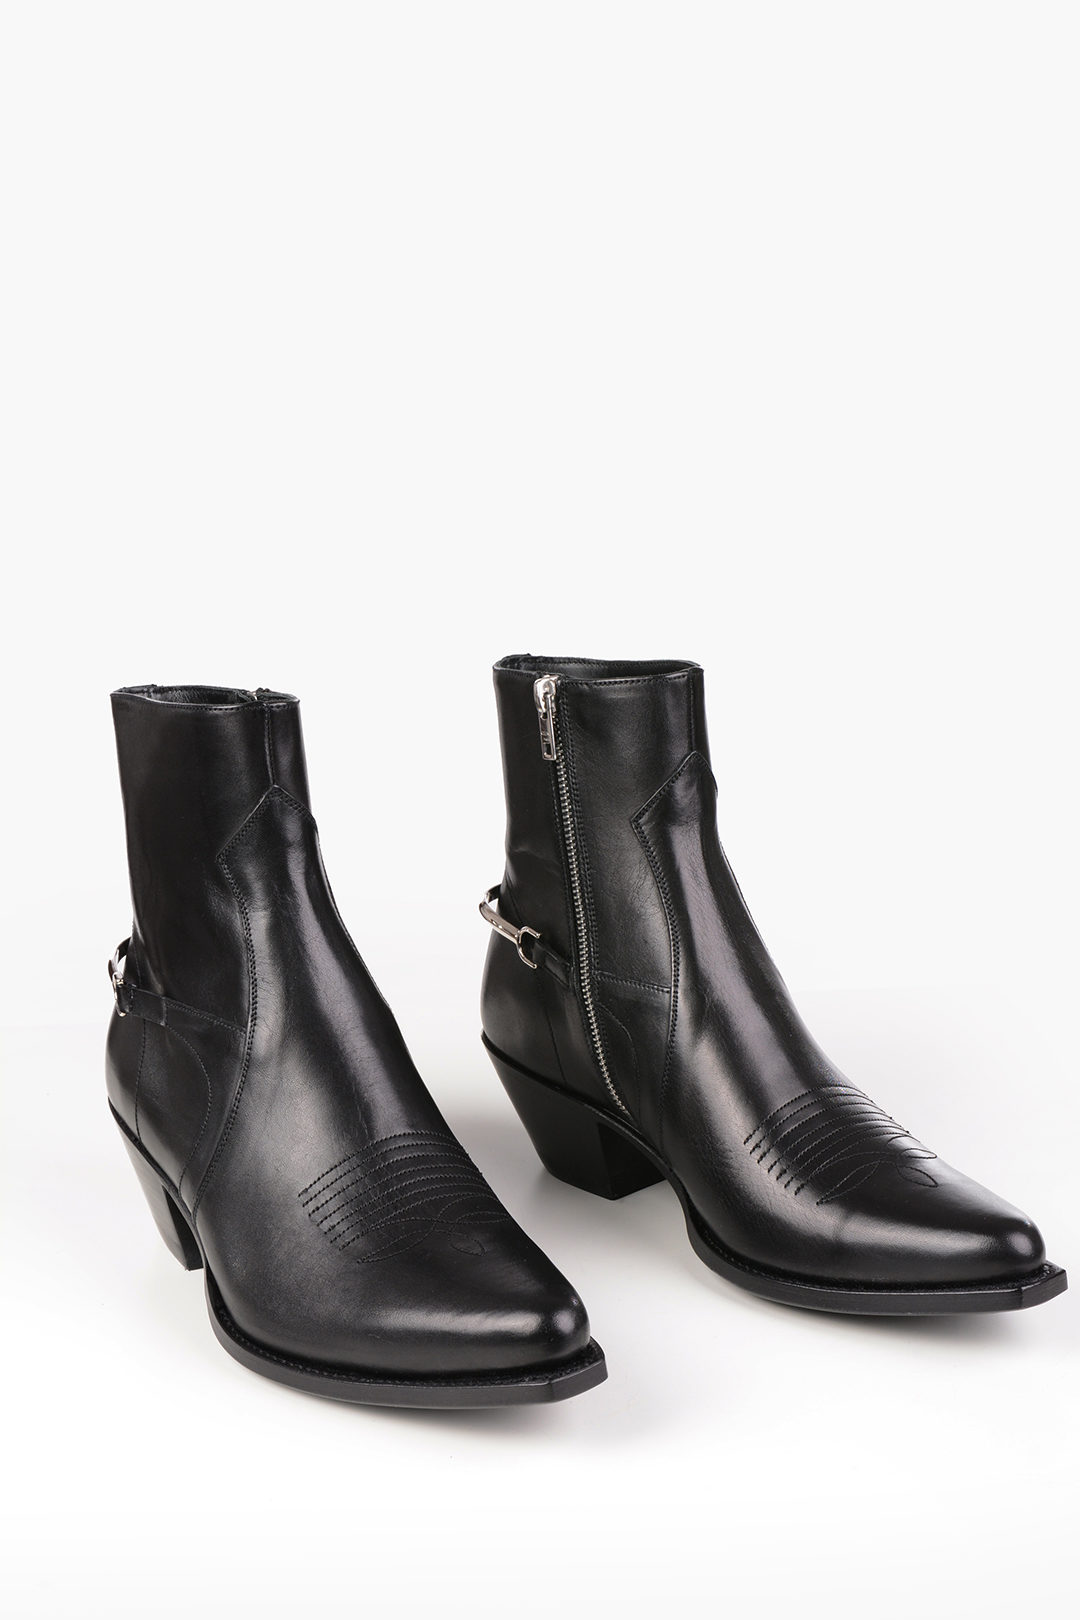 Celine Leather BERLIN CAVALRY Texan Boots 5cm men - Glamood Outlet